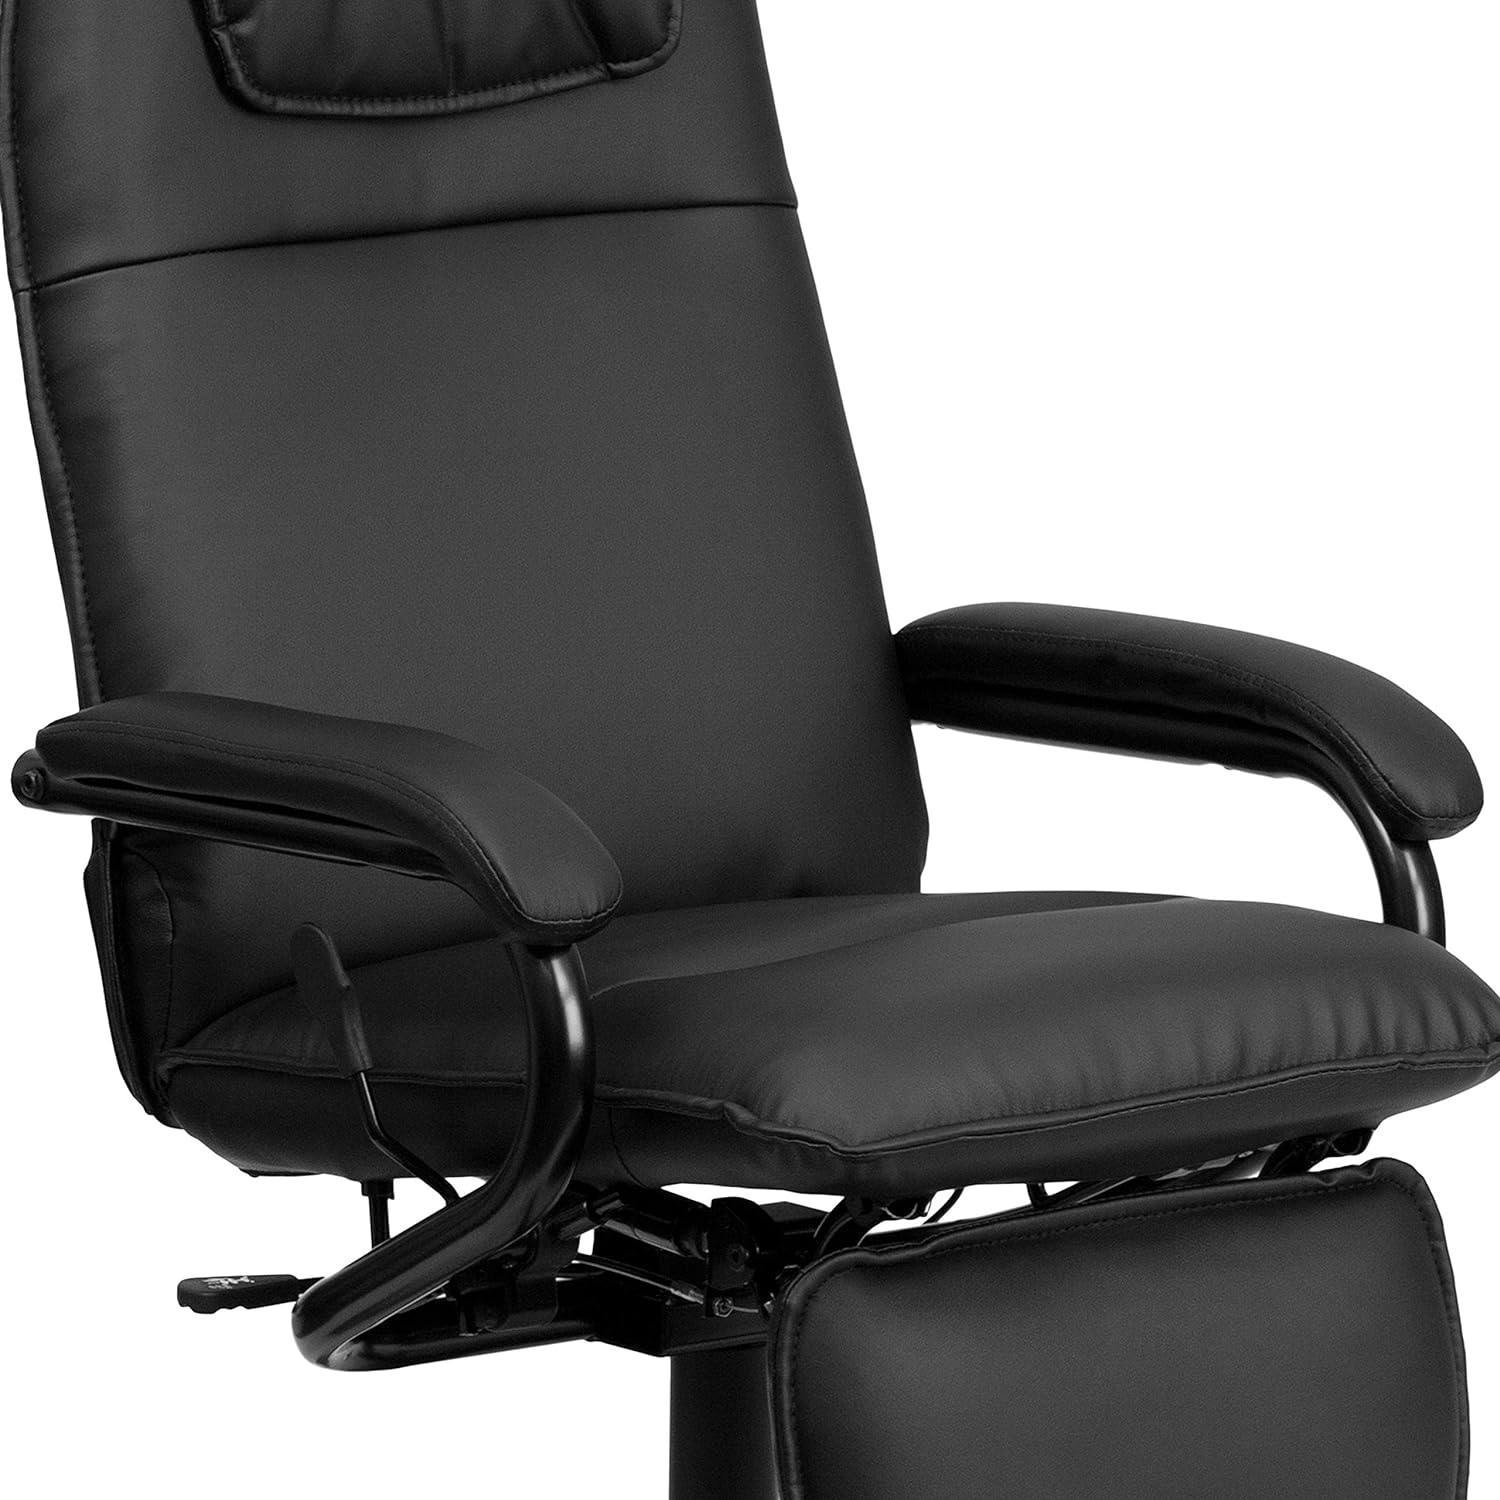 Elegance Executive High Back Swivel Chair with LeatherSoft and Adjustable Footrest, Black